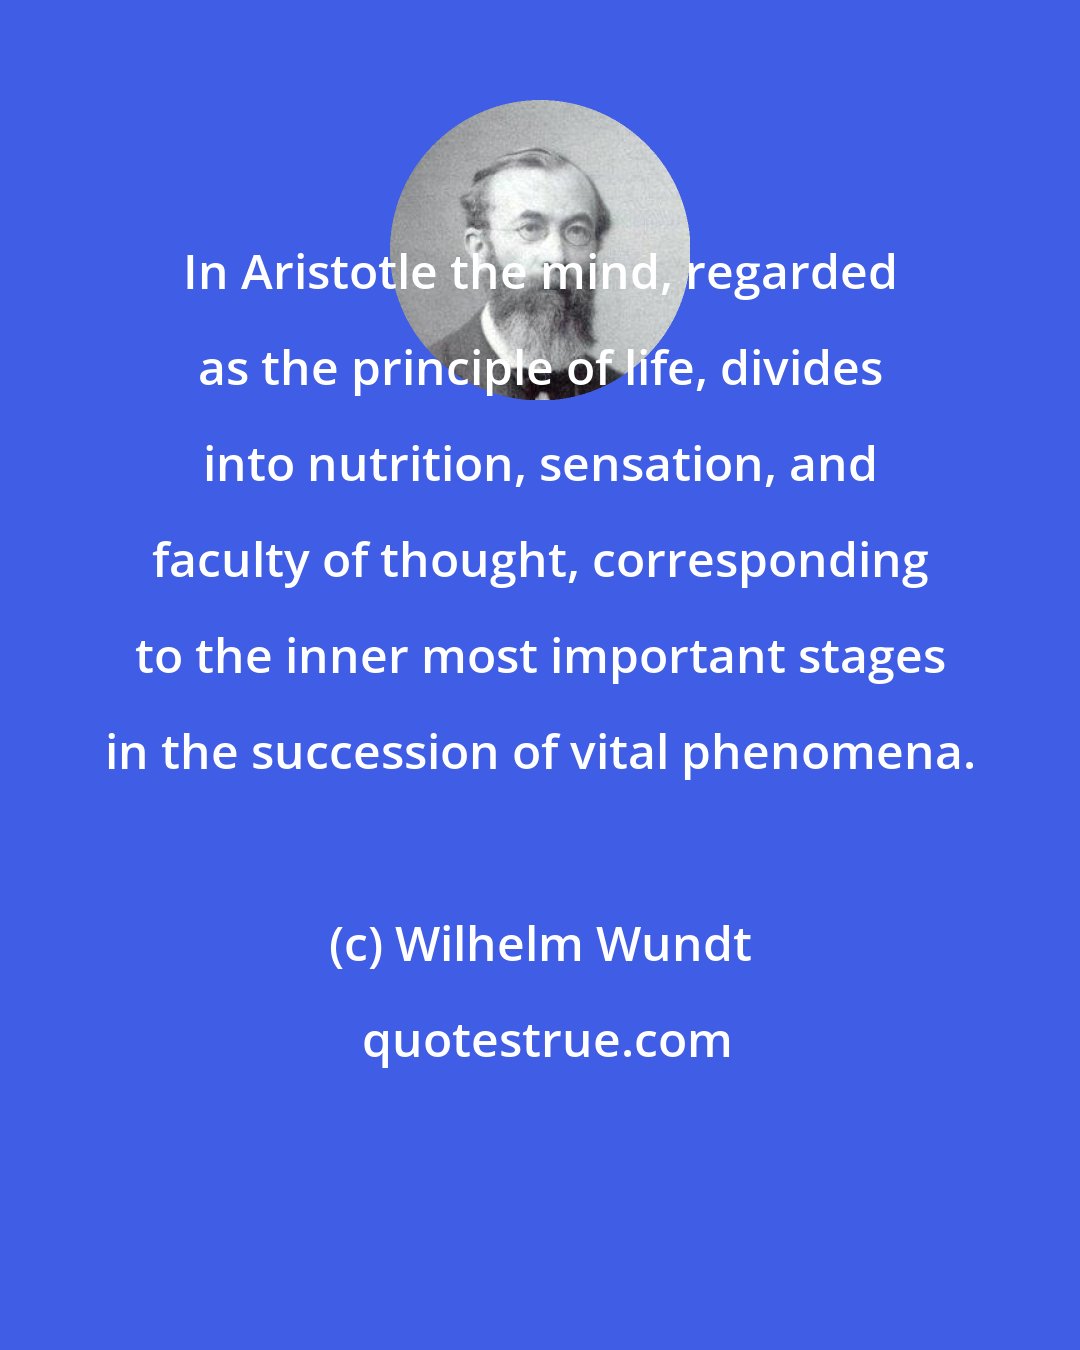 Wilhelm Wundt: In Aristotle the mind, regarded as the principle of life, divides into nutrition, sensation, and faculty of thought, corresponding to the inner most important stages in the succession of vital phenomena.